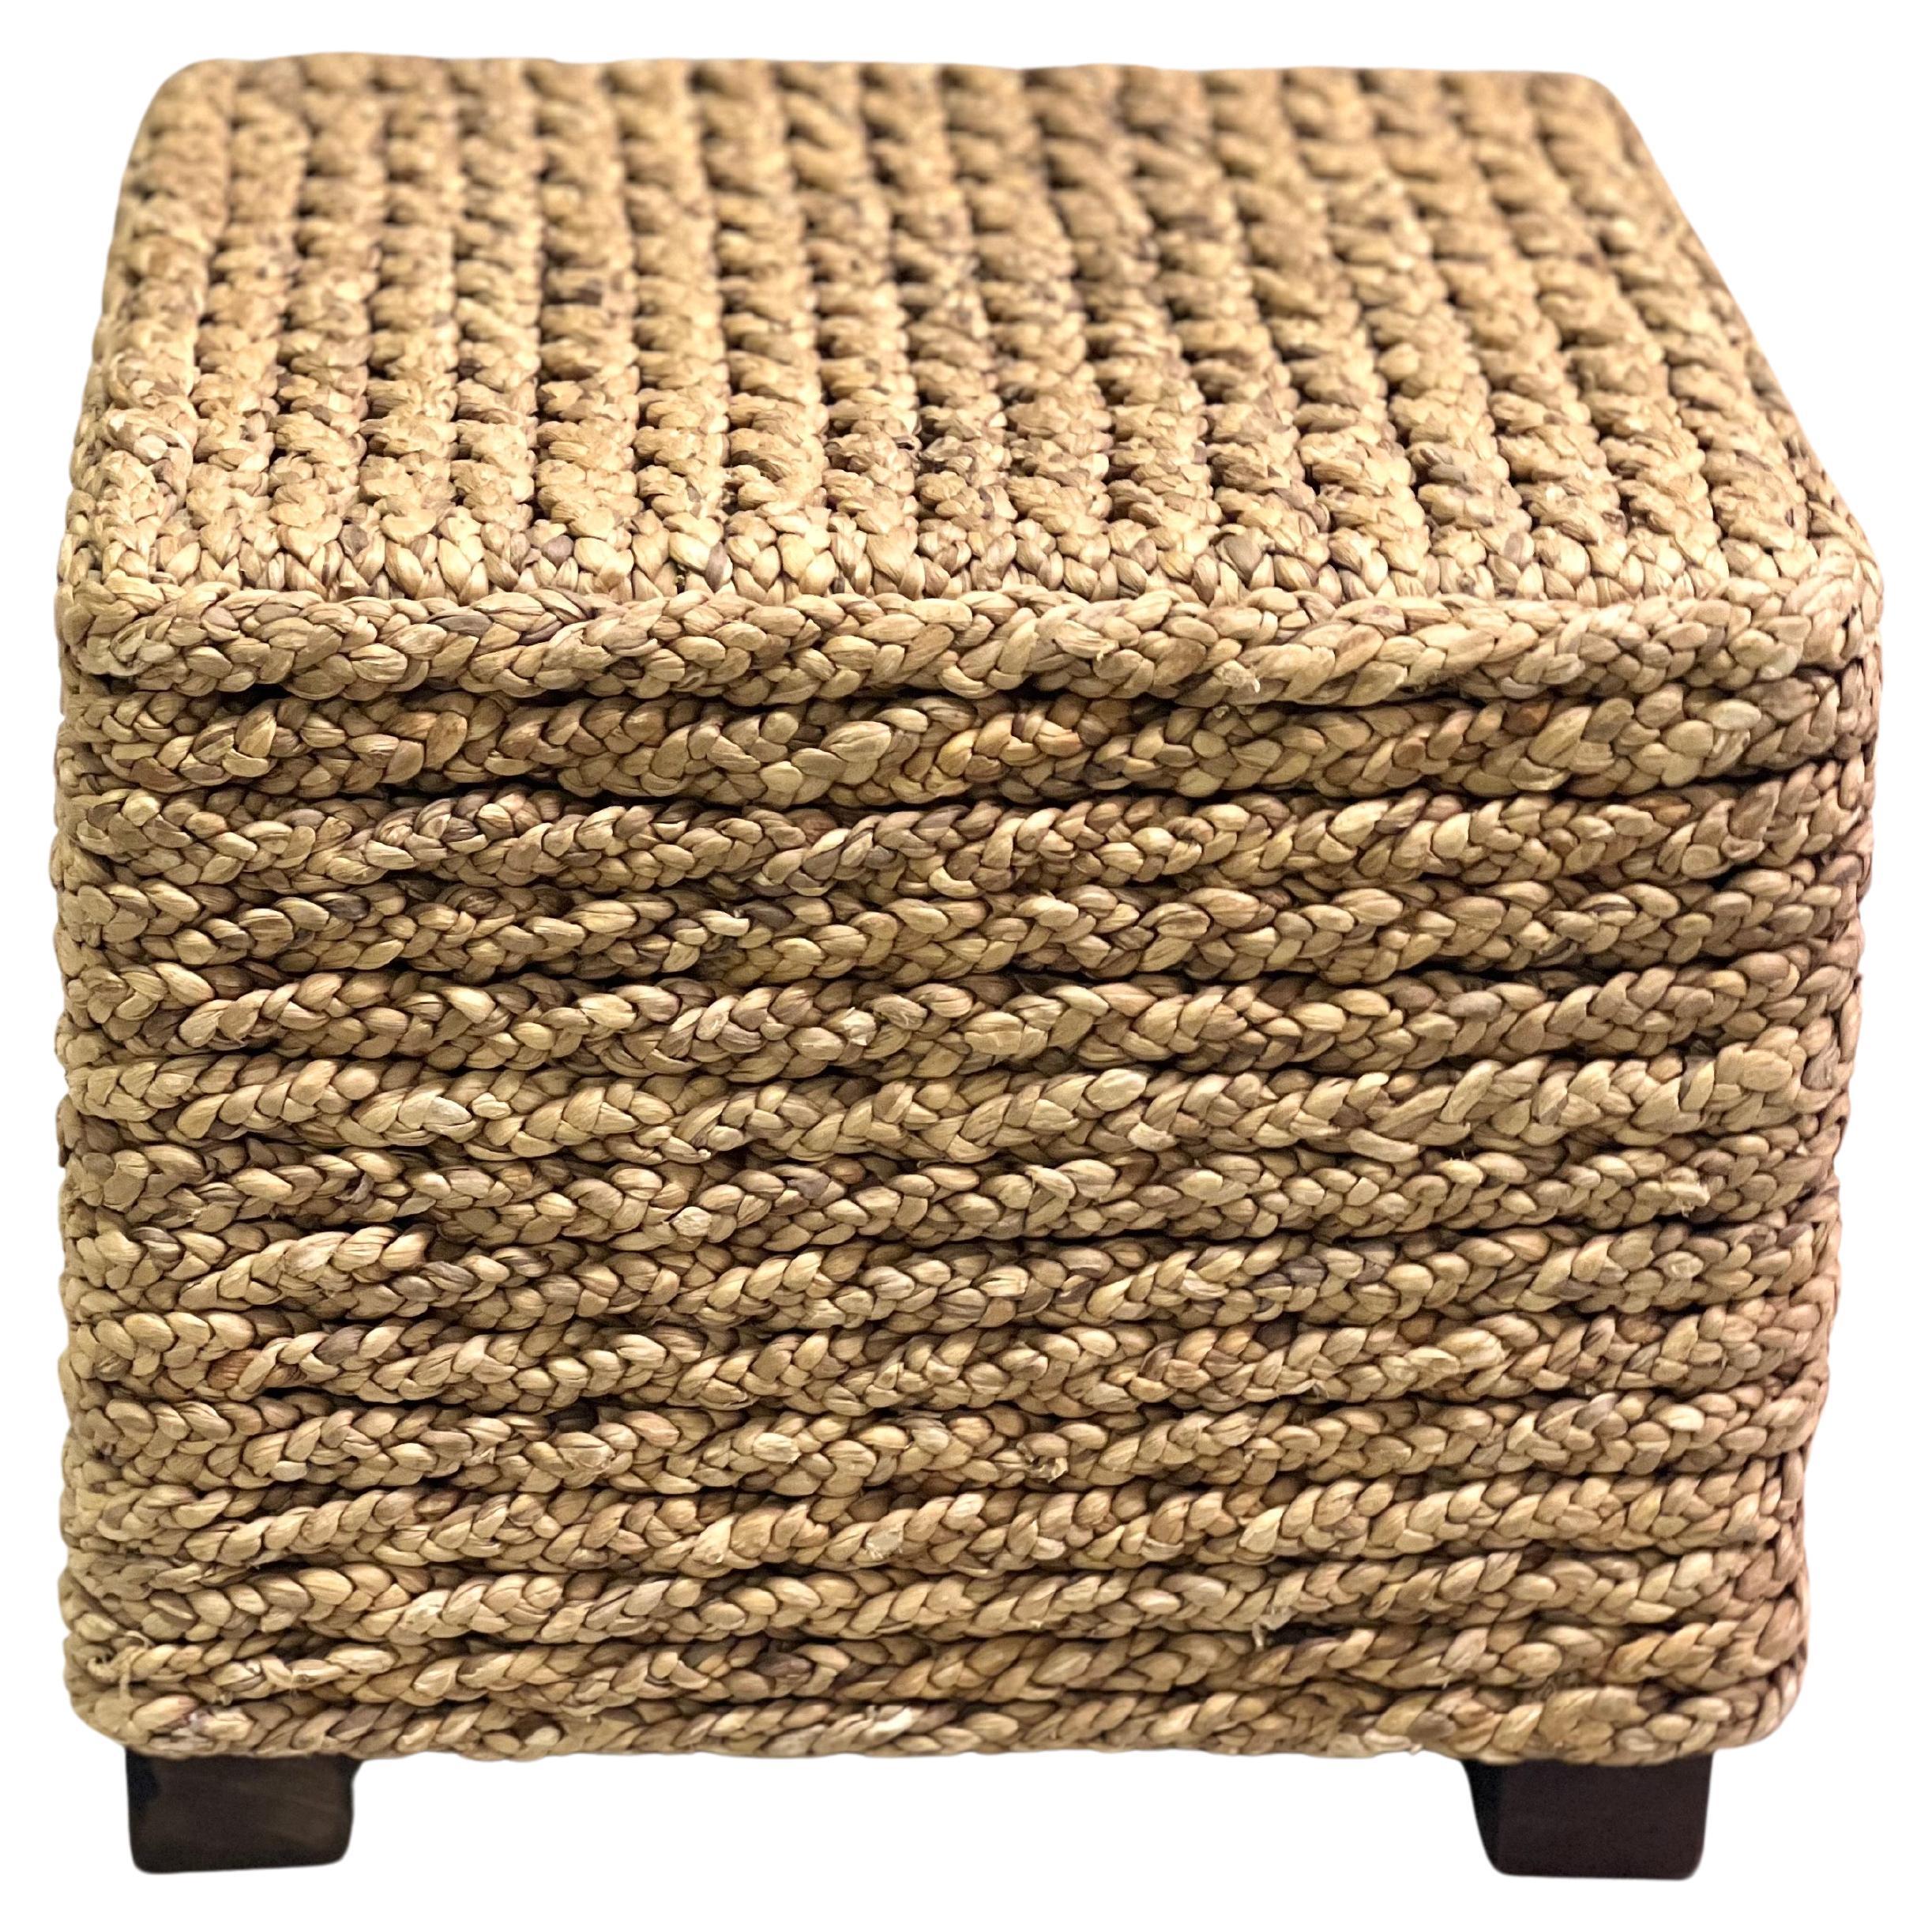 1 French Mid-Century Rope Stool / Bench by Adrien Audoux & Frida Minet For Sale